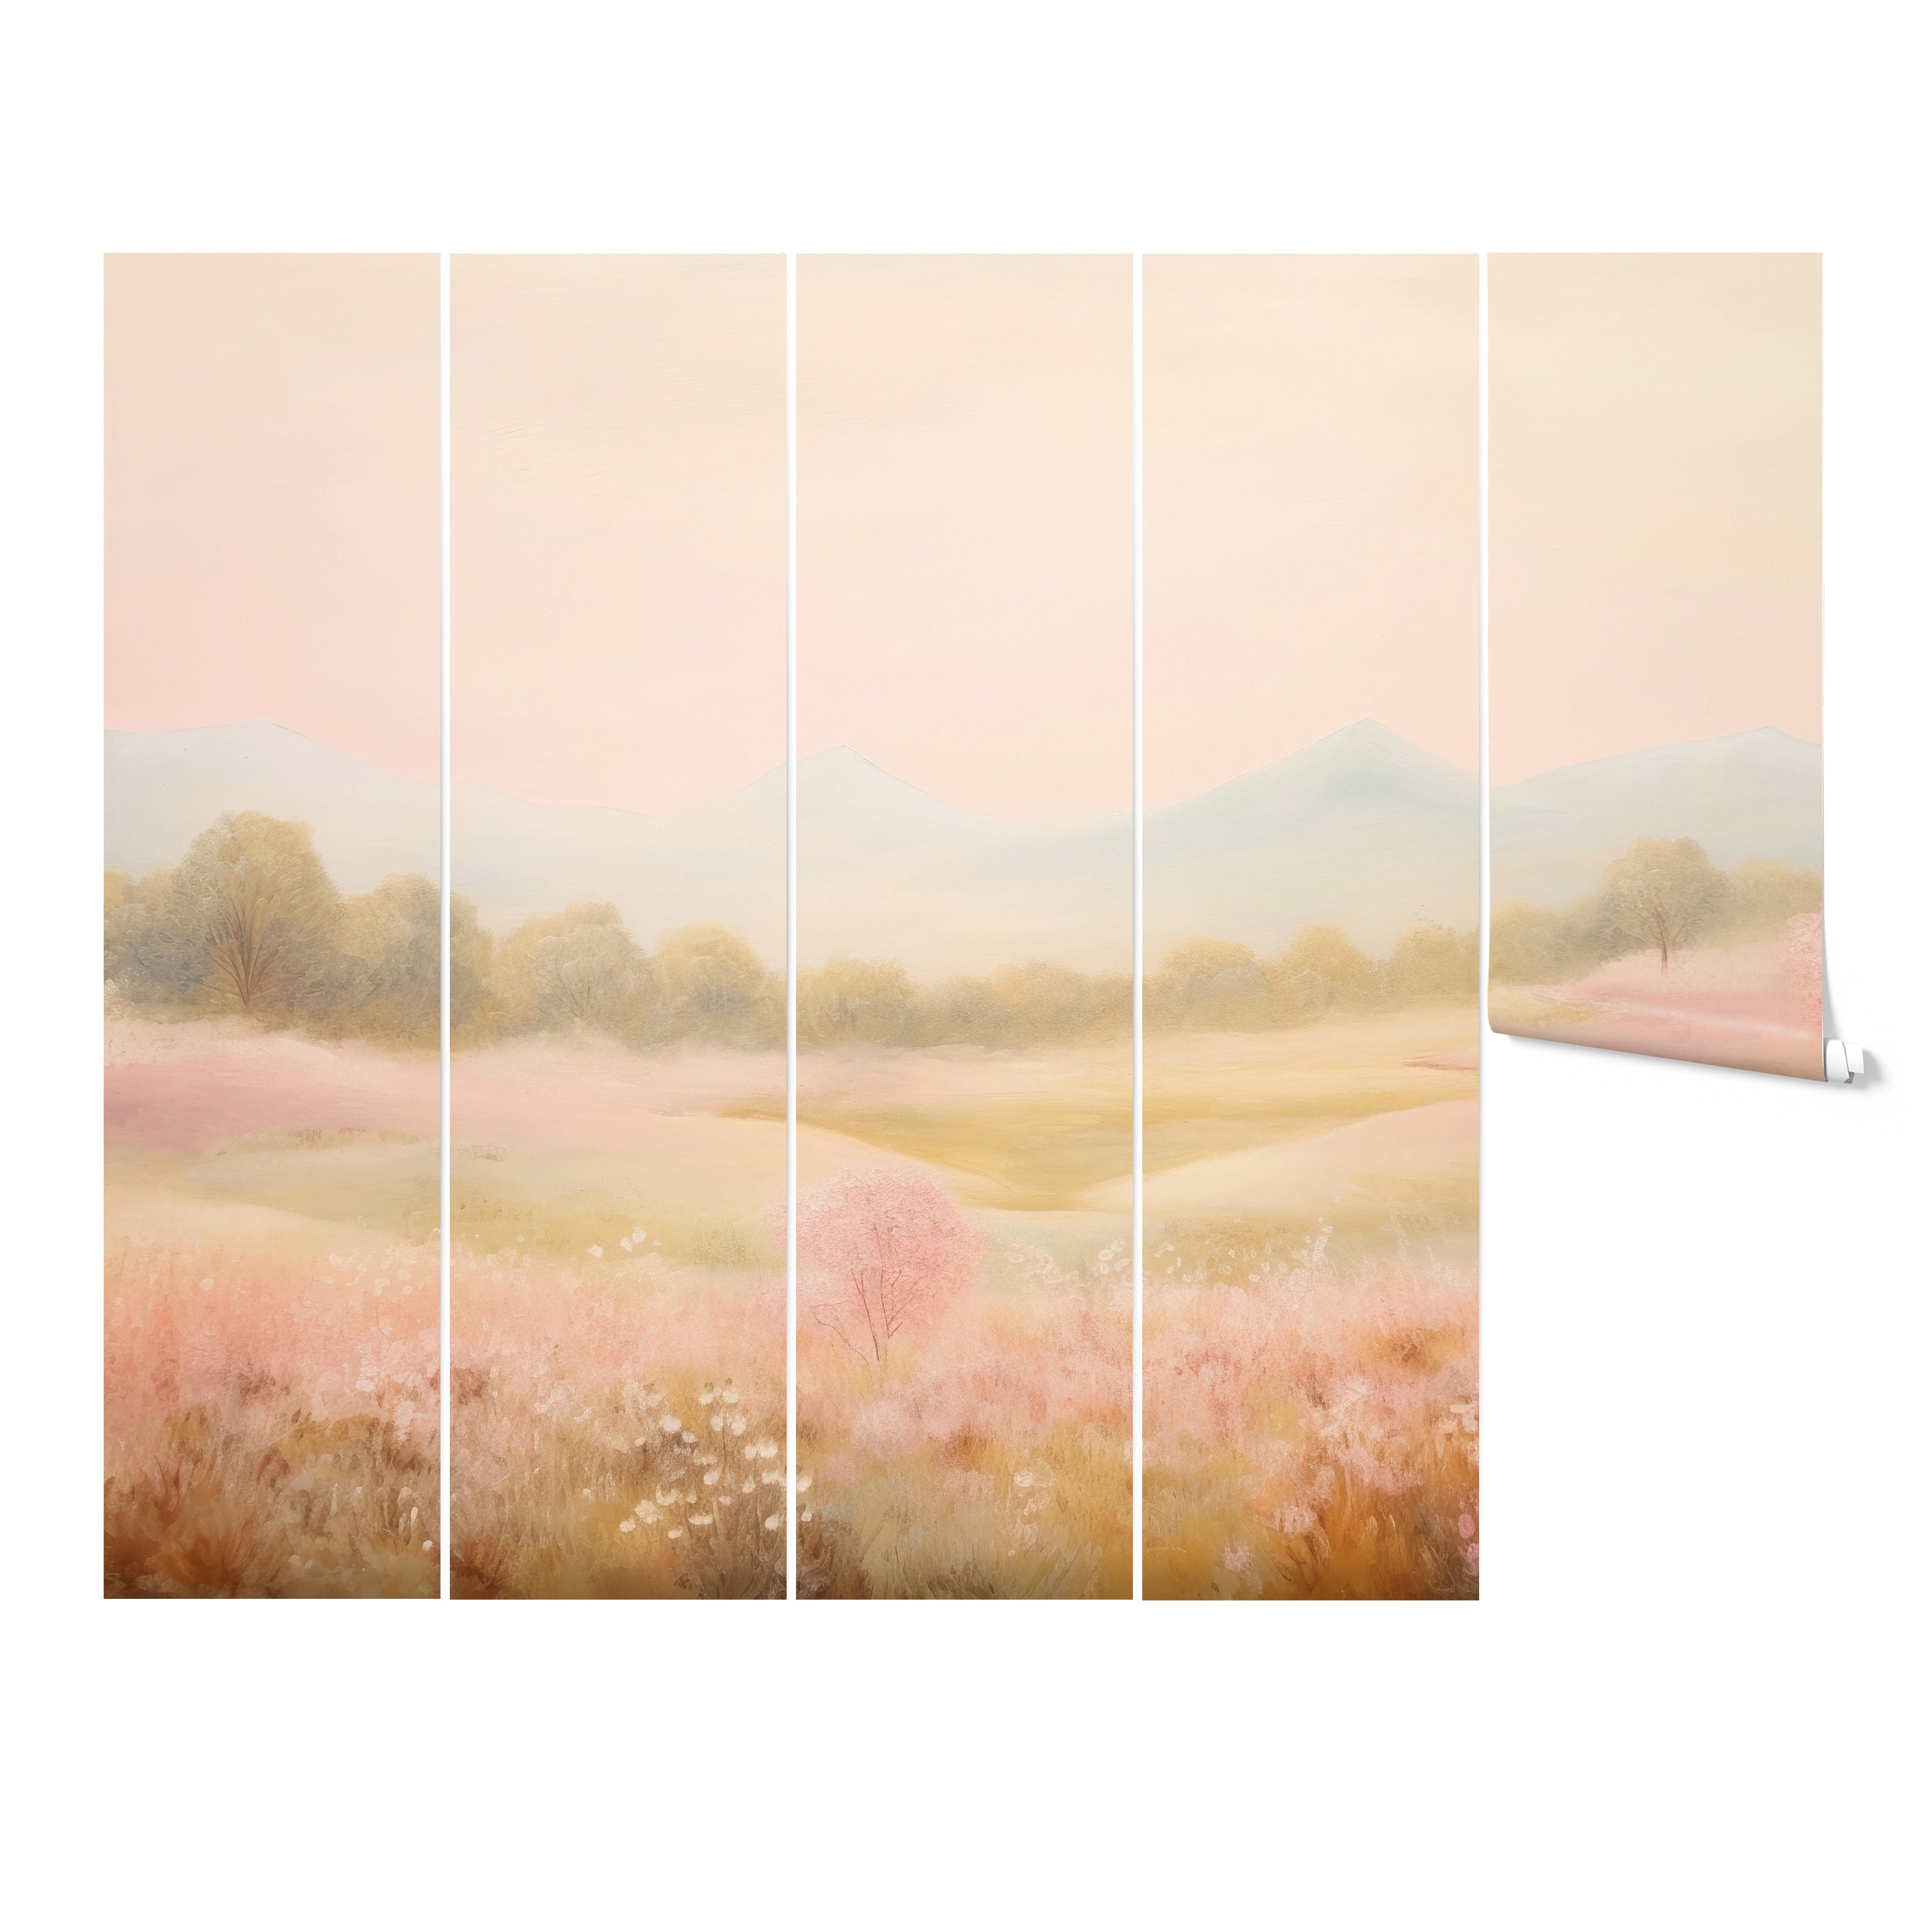 Landscape mural of a spring valley with blooming pink trees and distant mountains in soft pastel colors.